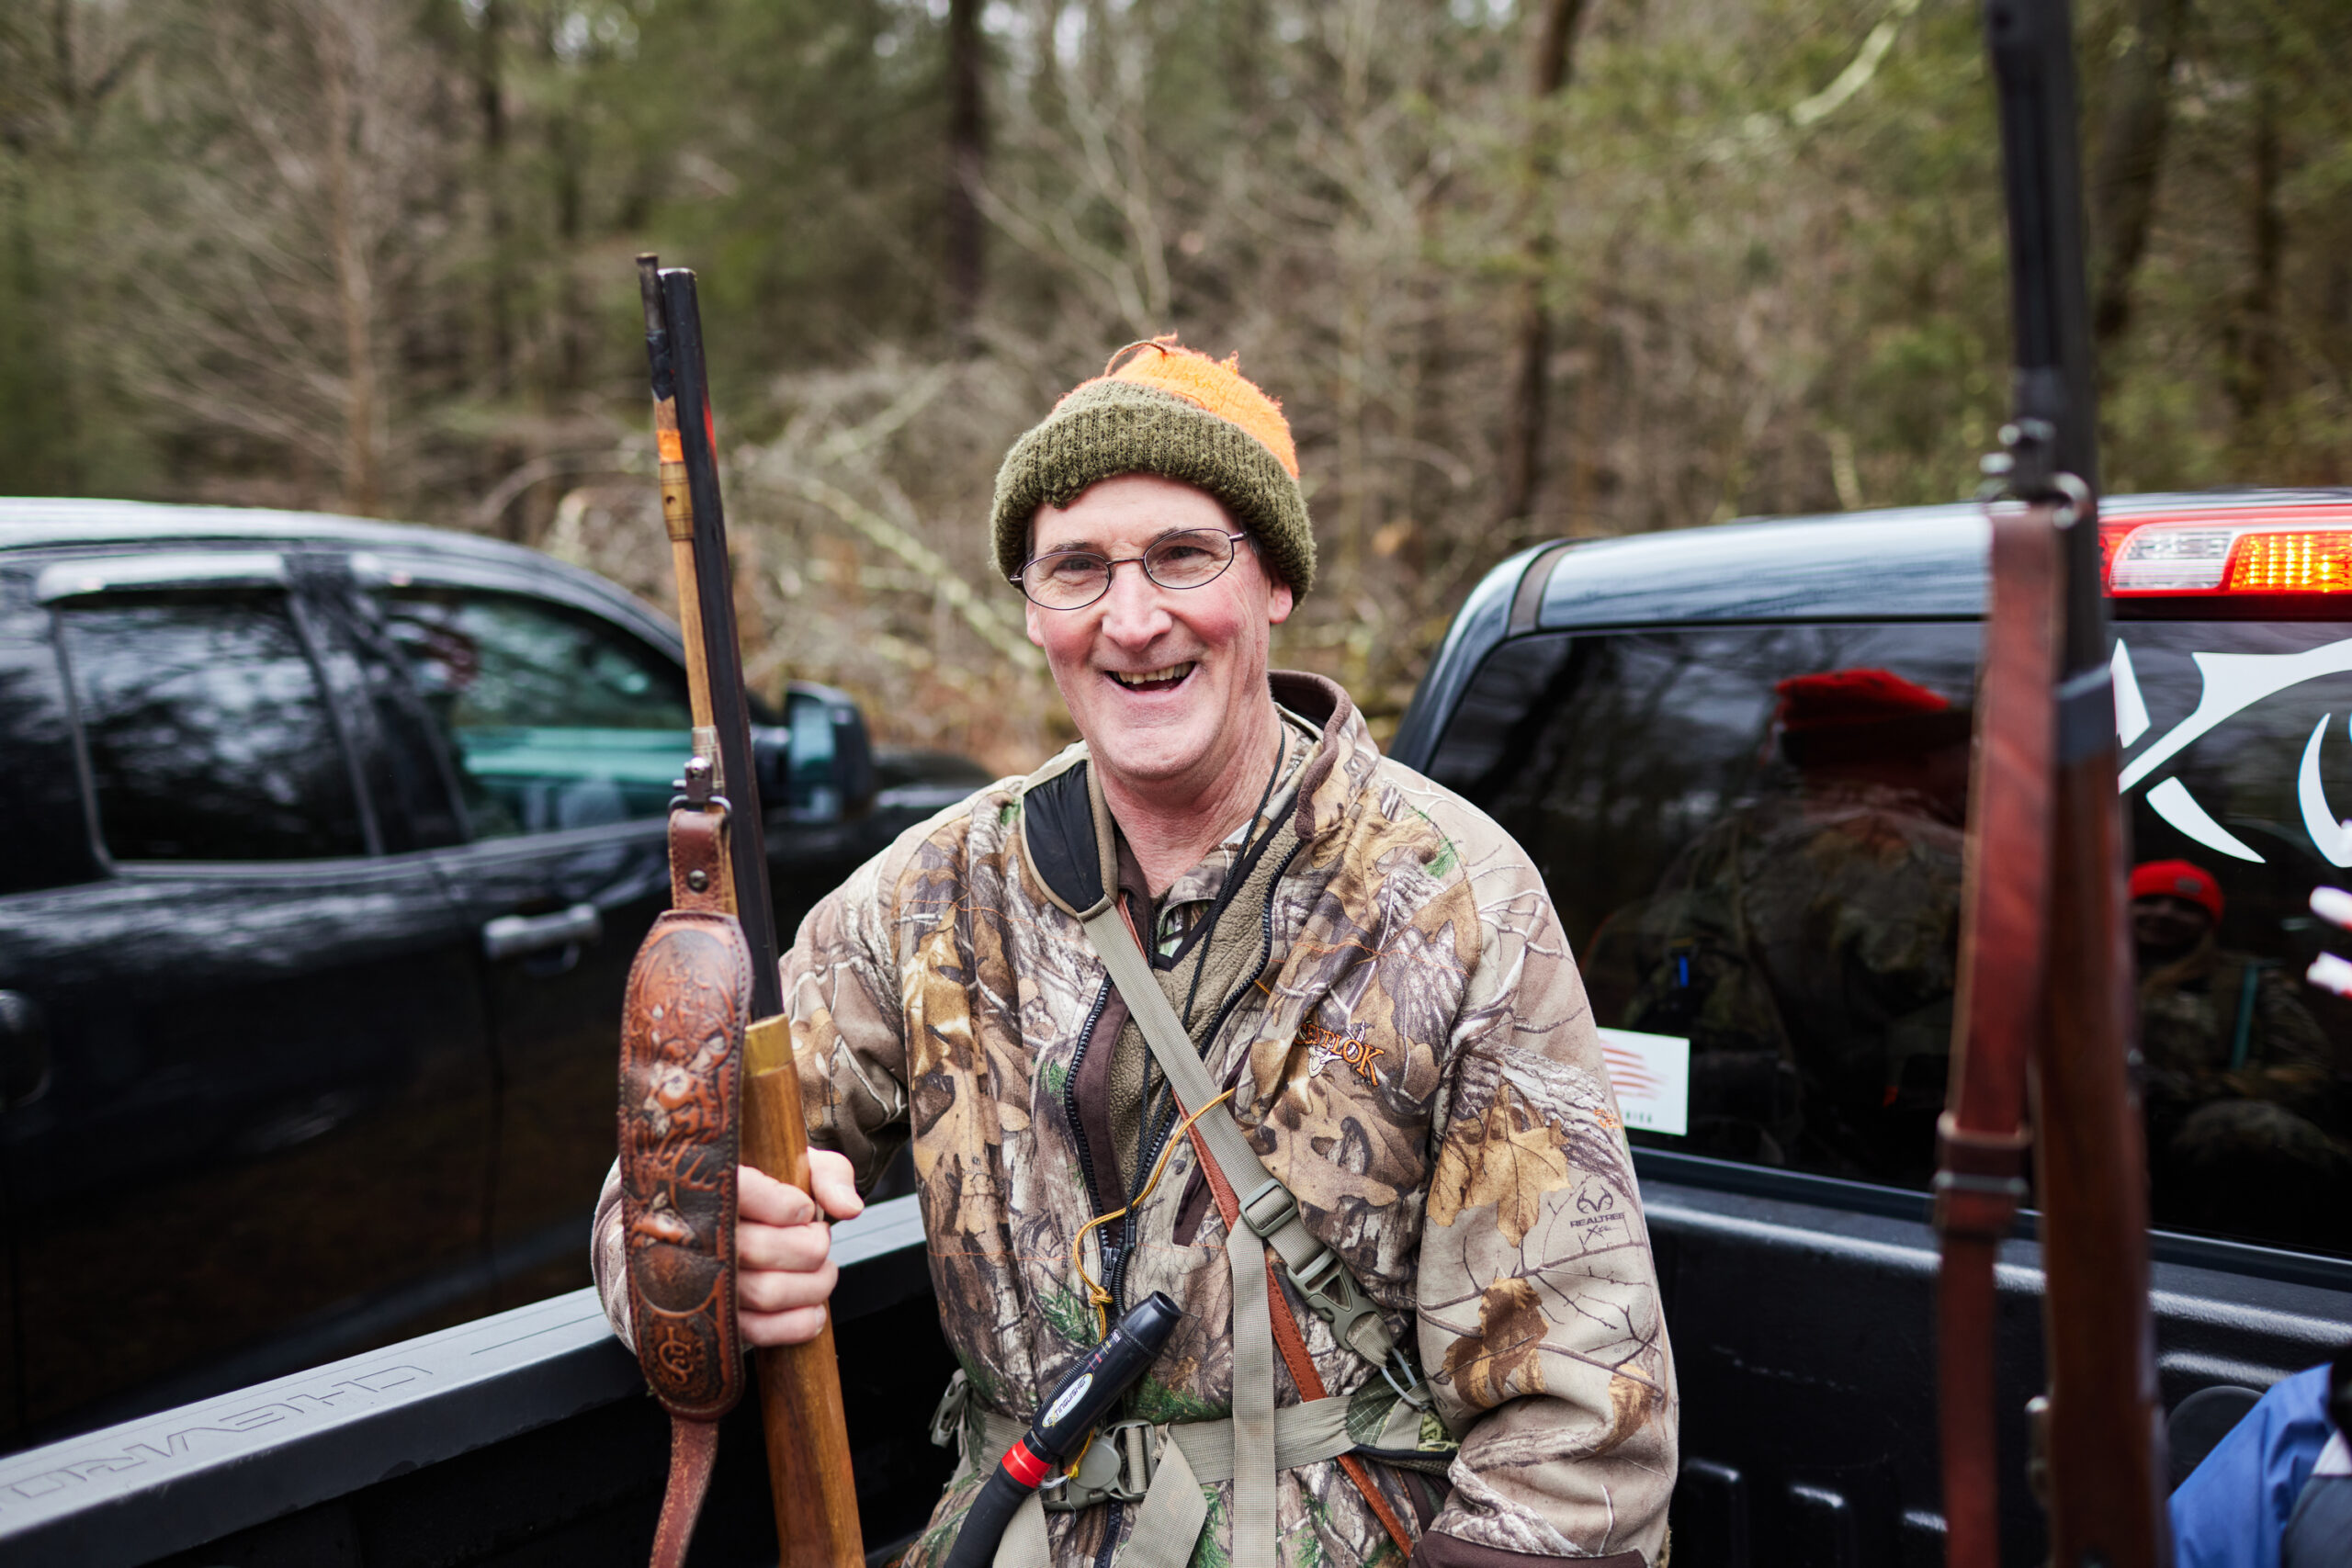 A smiling hunter stands by a pair of pickups, holding a flintlock rifle.